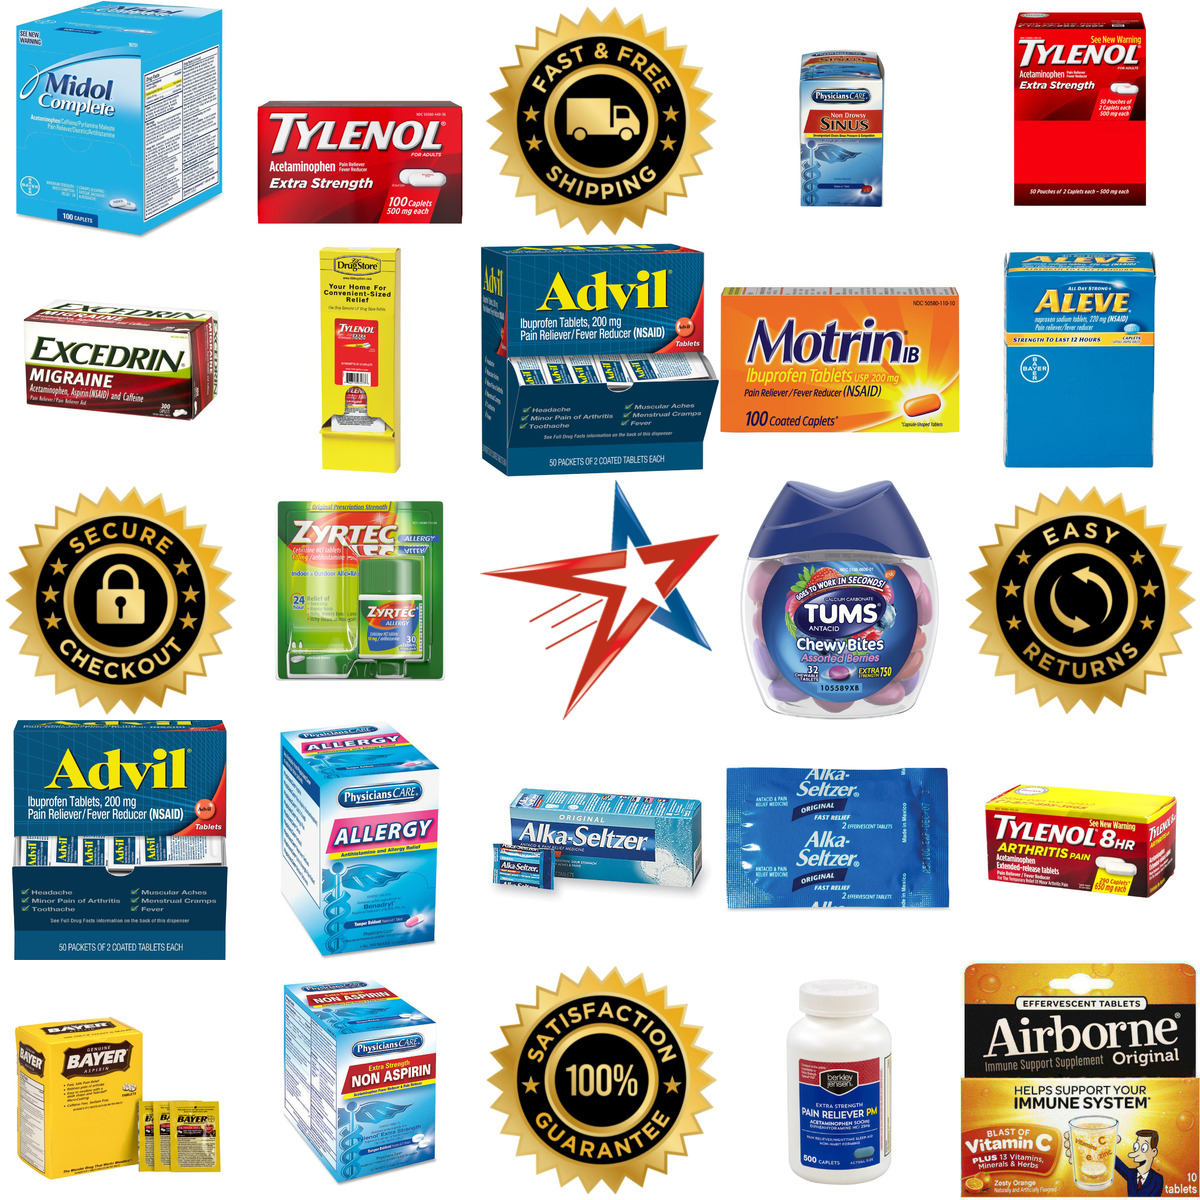 A selection of Medicine products on GoVets